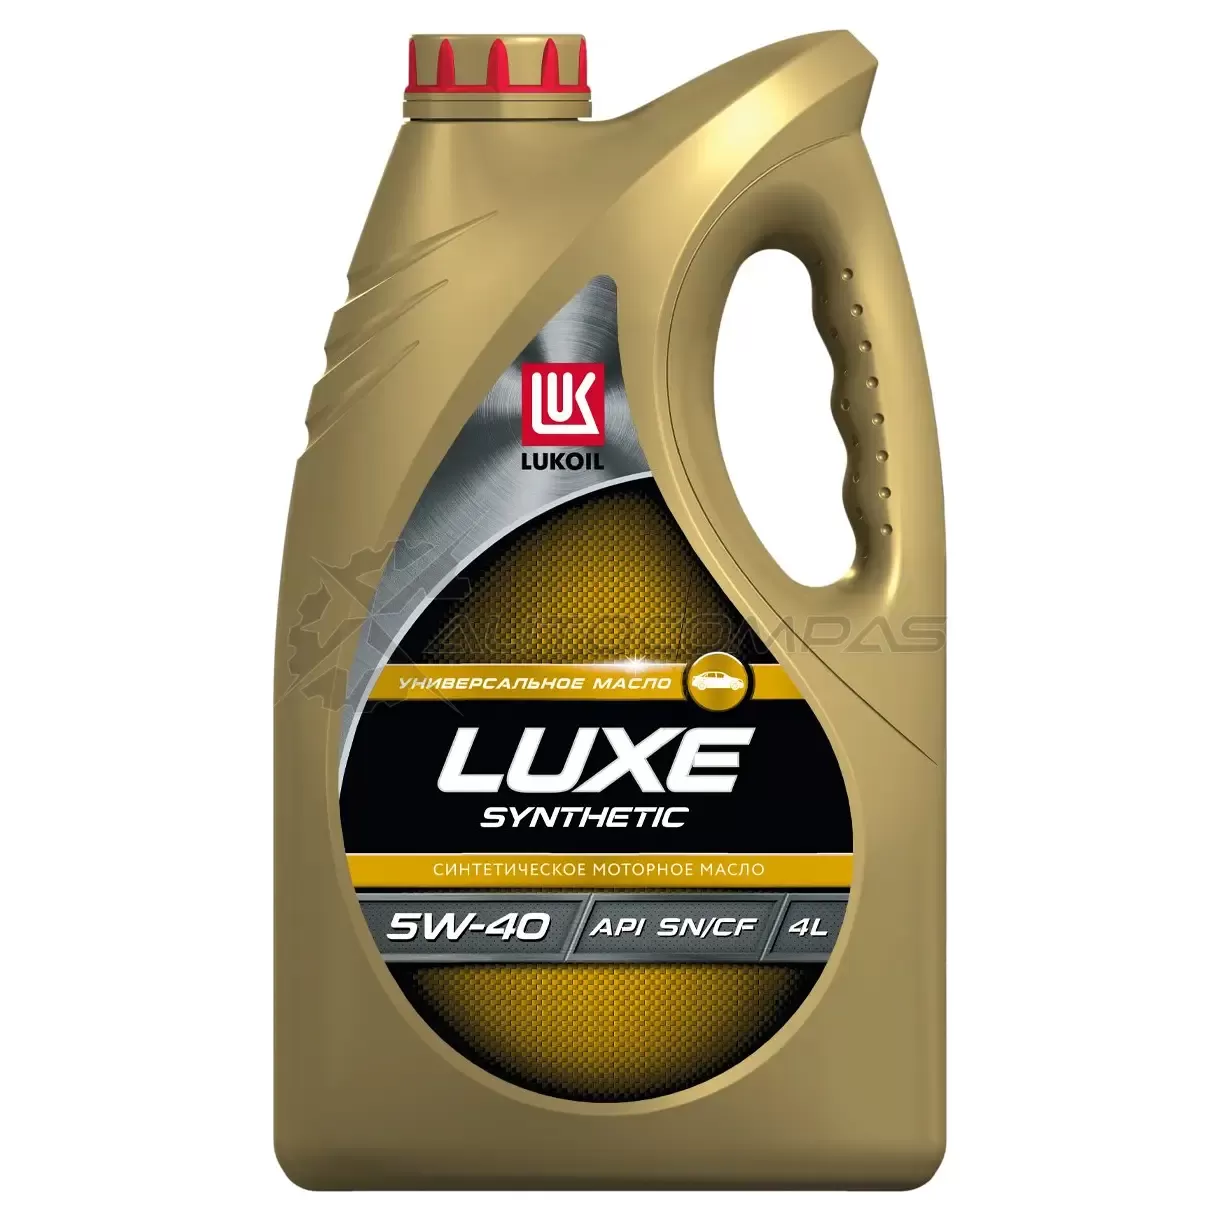 Моторное масло LUXE SYNTHETIC 5W-40 - 4 л LUKOIL 207465 1441021775 H 12C89D изображение 0